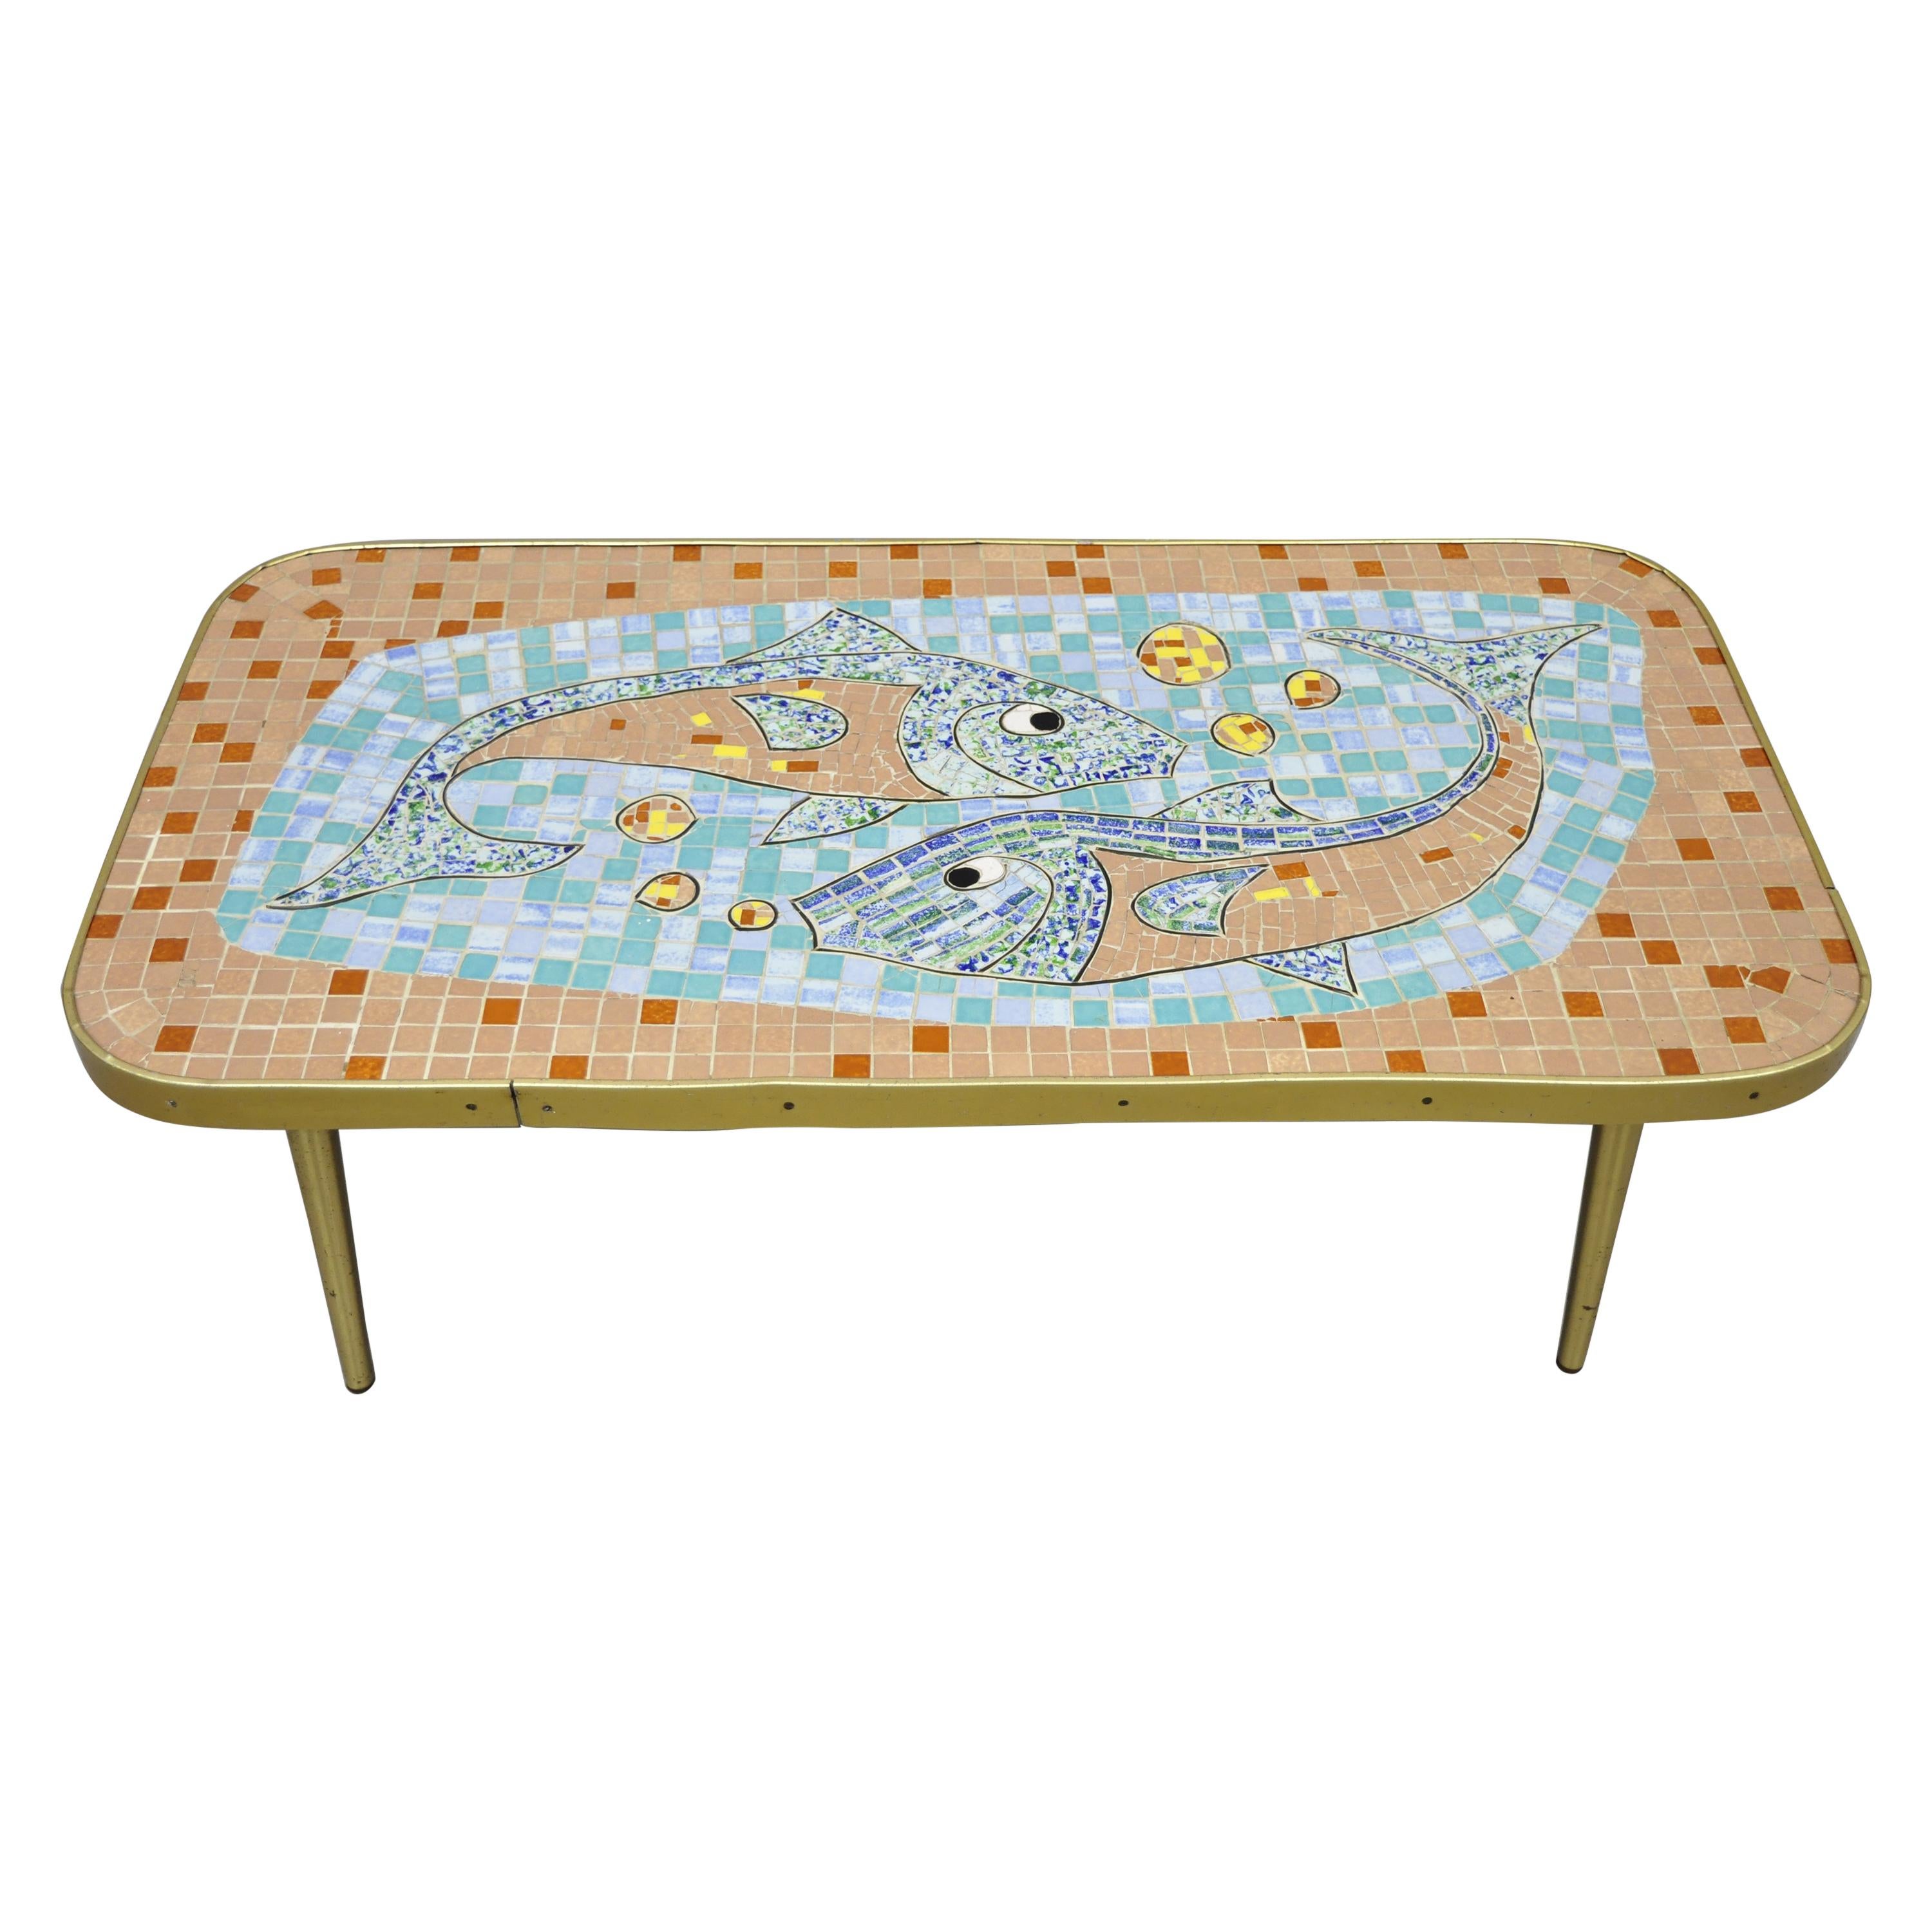 Vintage Mid-Century Modern Blue Mosaic Tile Top Coffee Table Fish and Bubbles